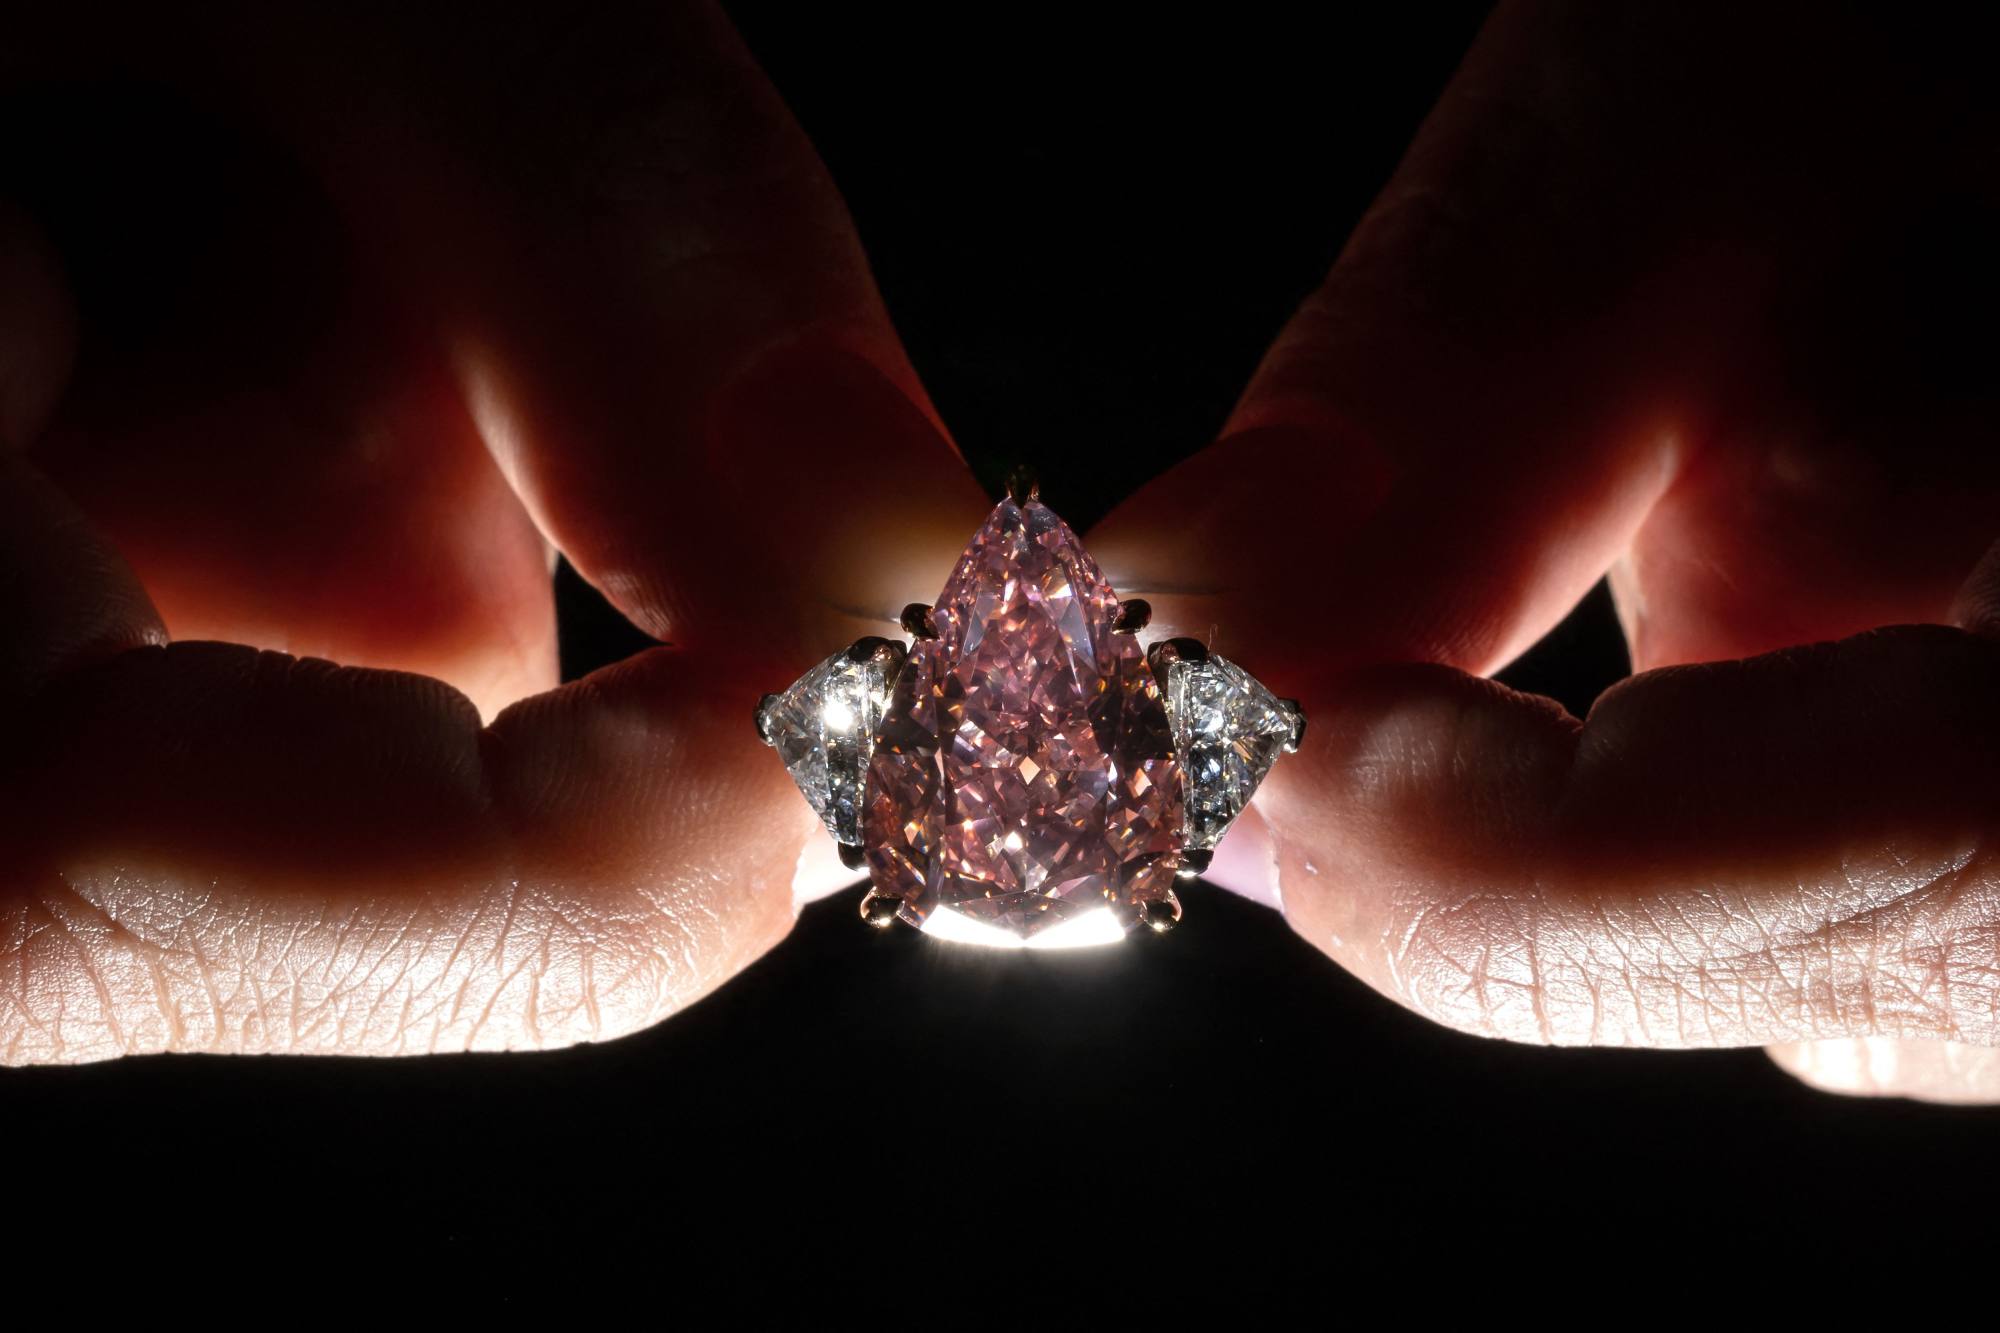 Scientists find ‘missing ingredient’ for pink diamonds